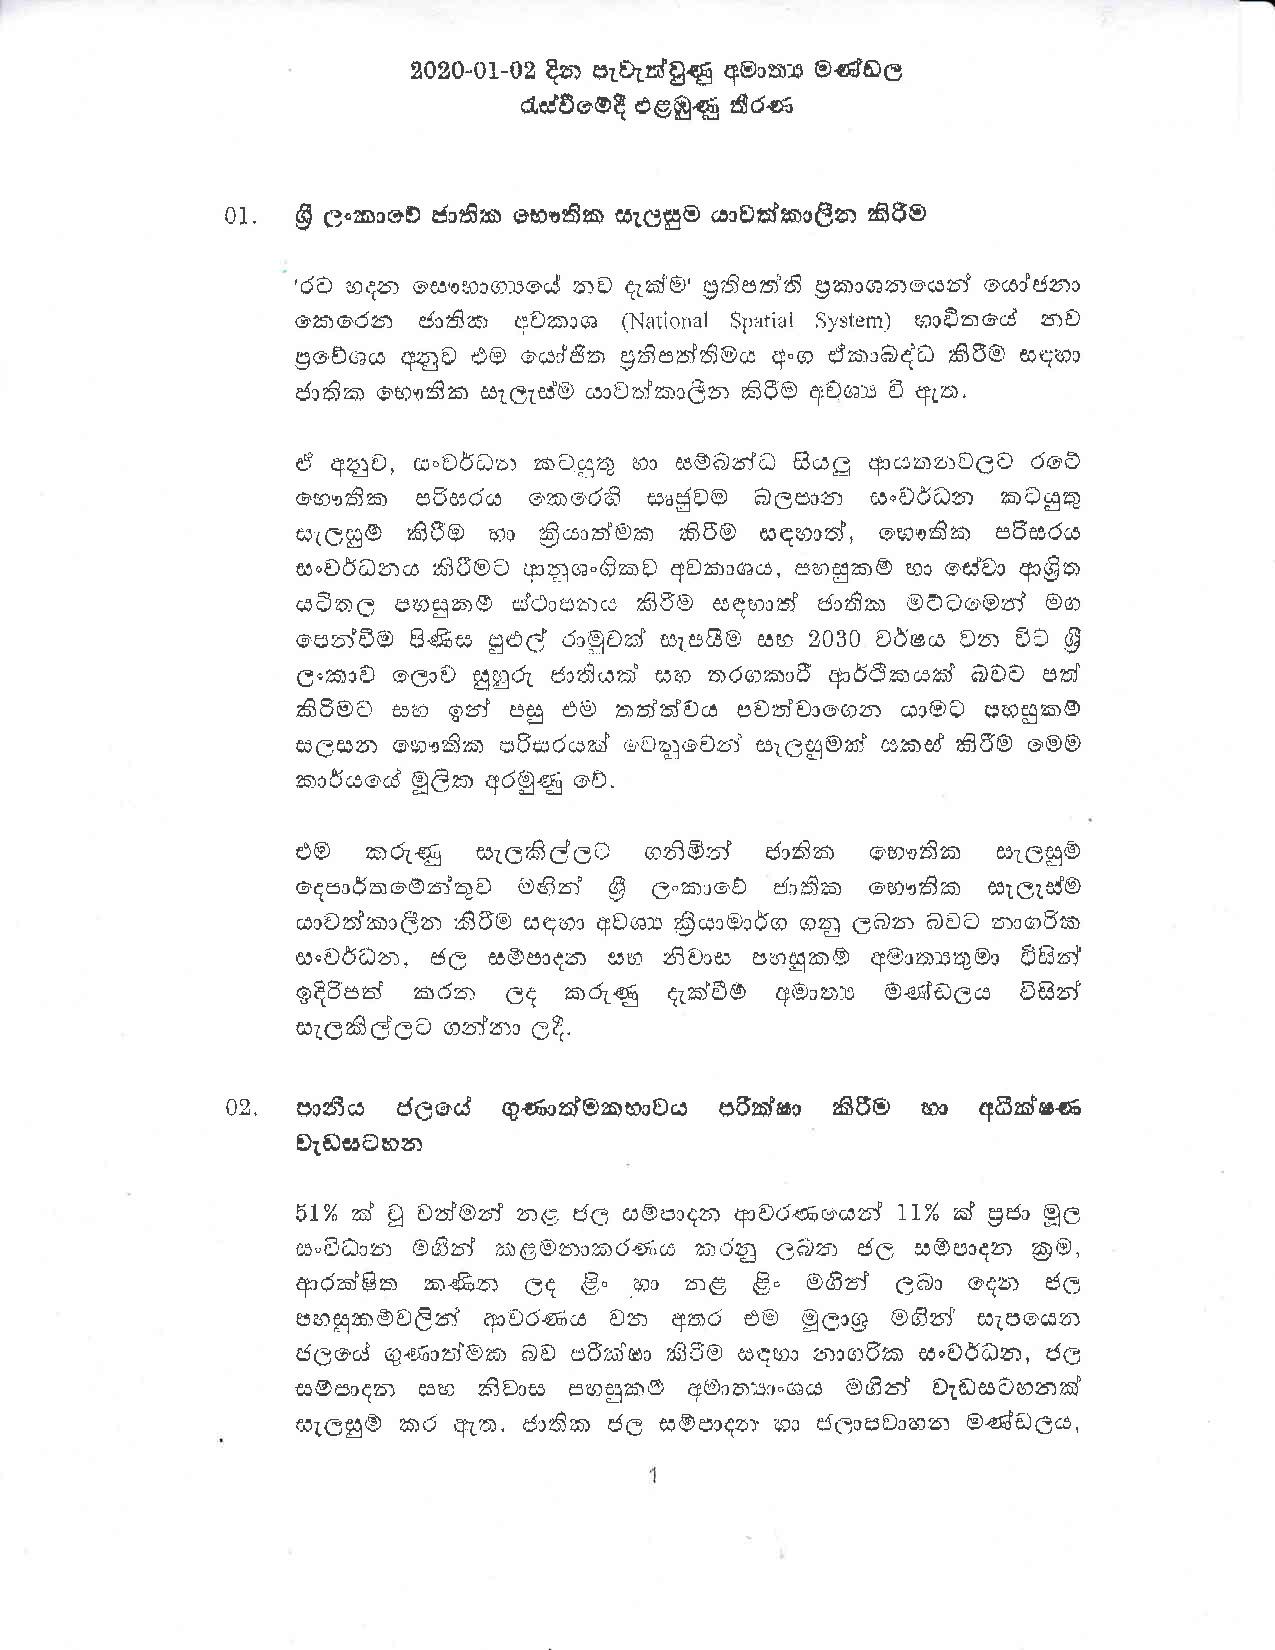 Cabinet Decision on 02.01.2020 page 001